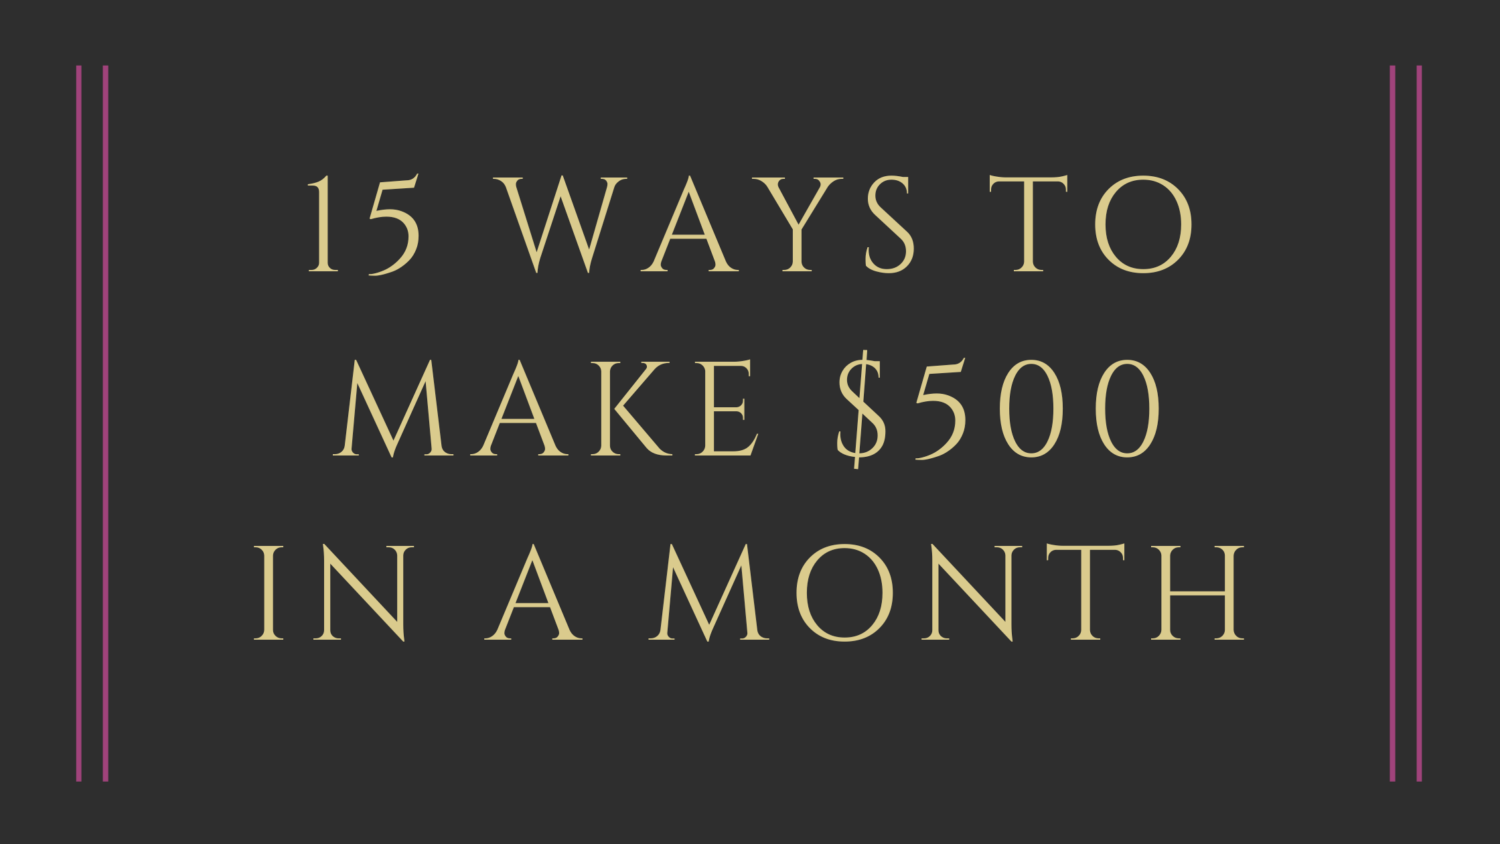 15 Ways to Make $500 in a Month